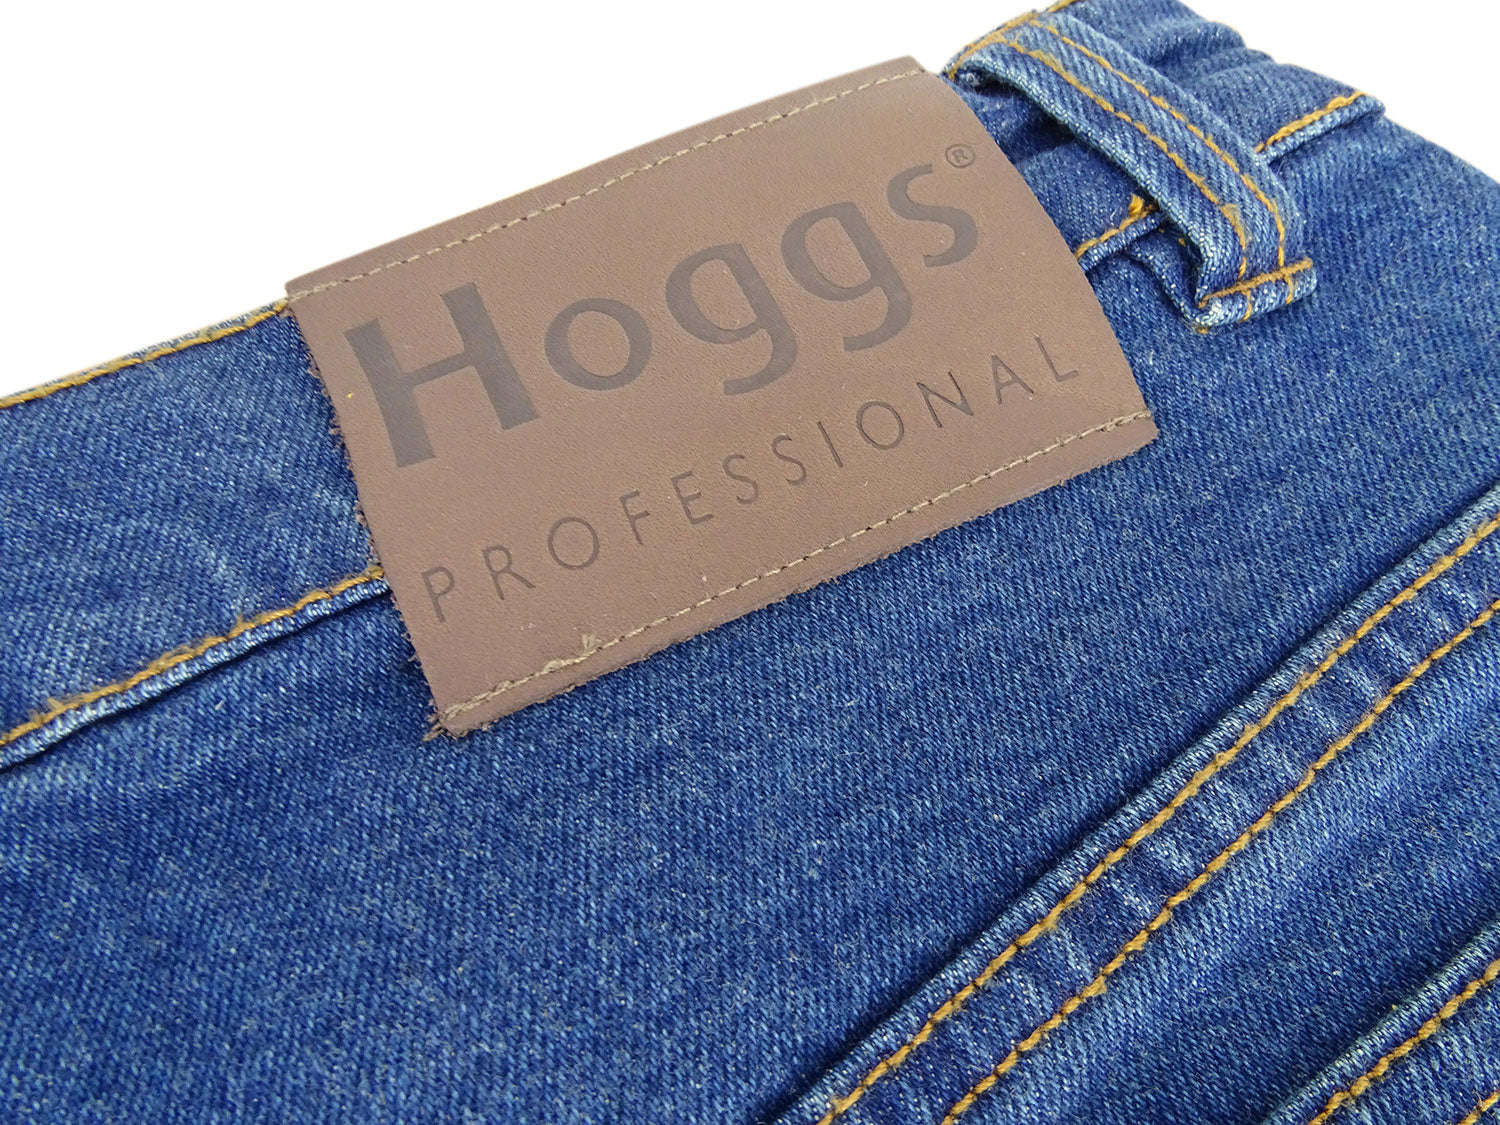 Hoggs Professional Jeans